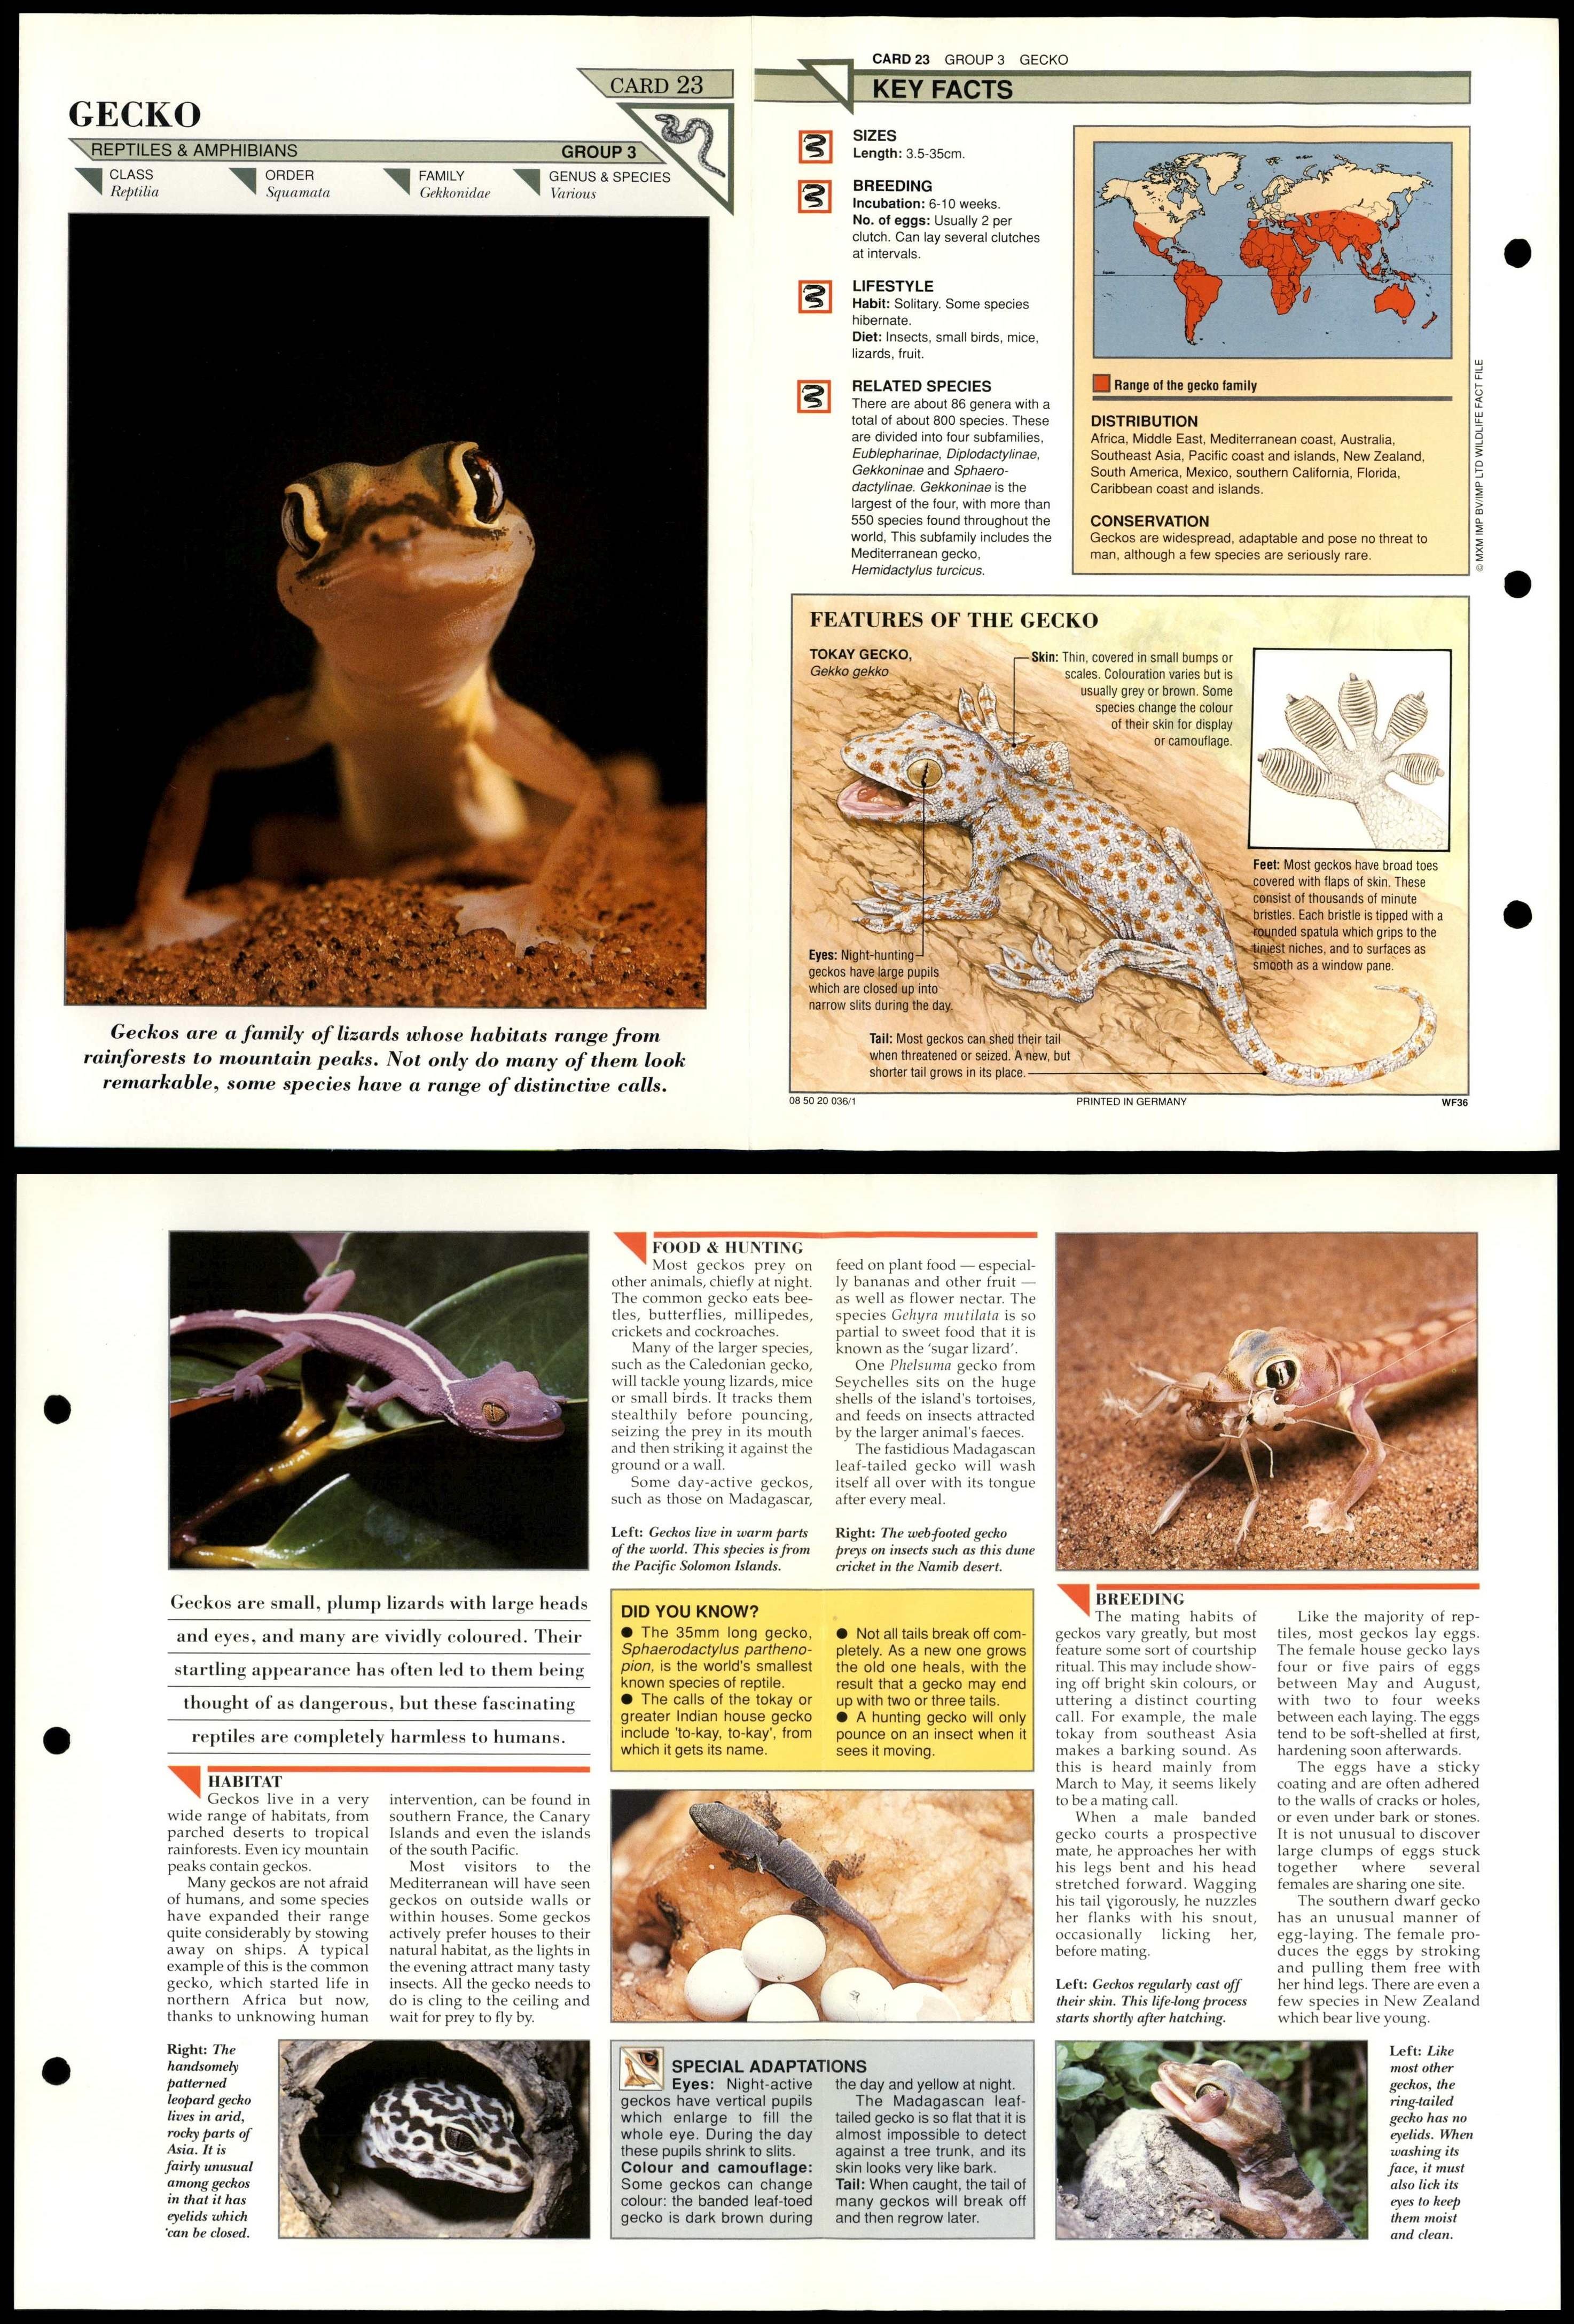 Gecko #23 Reptiles Wildlife Fact File Fold-Out Card